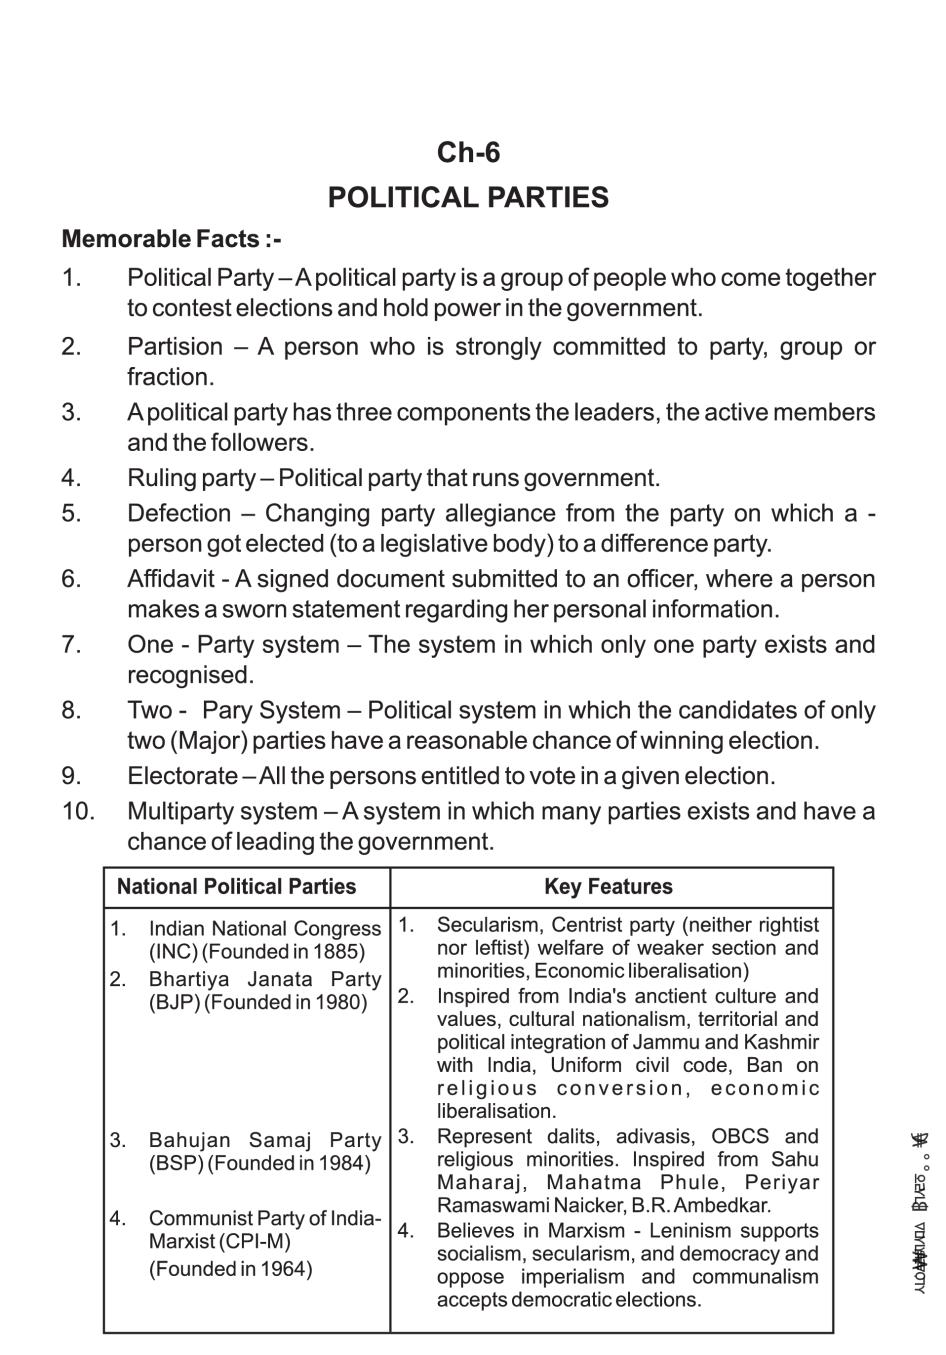 importance of political parties essay